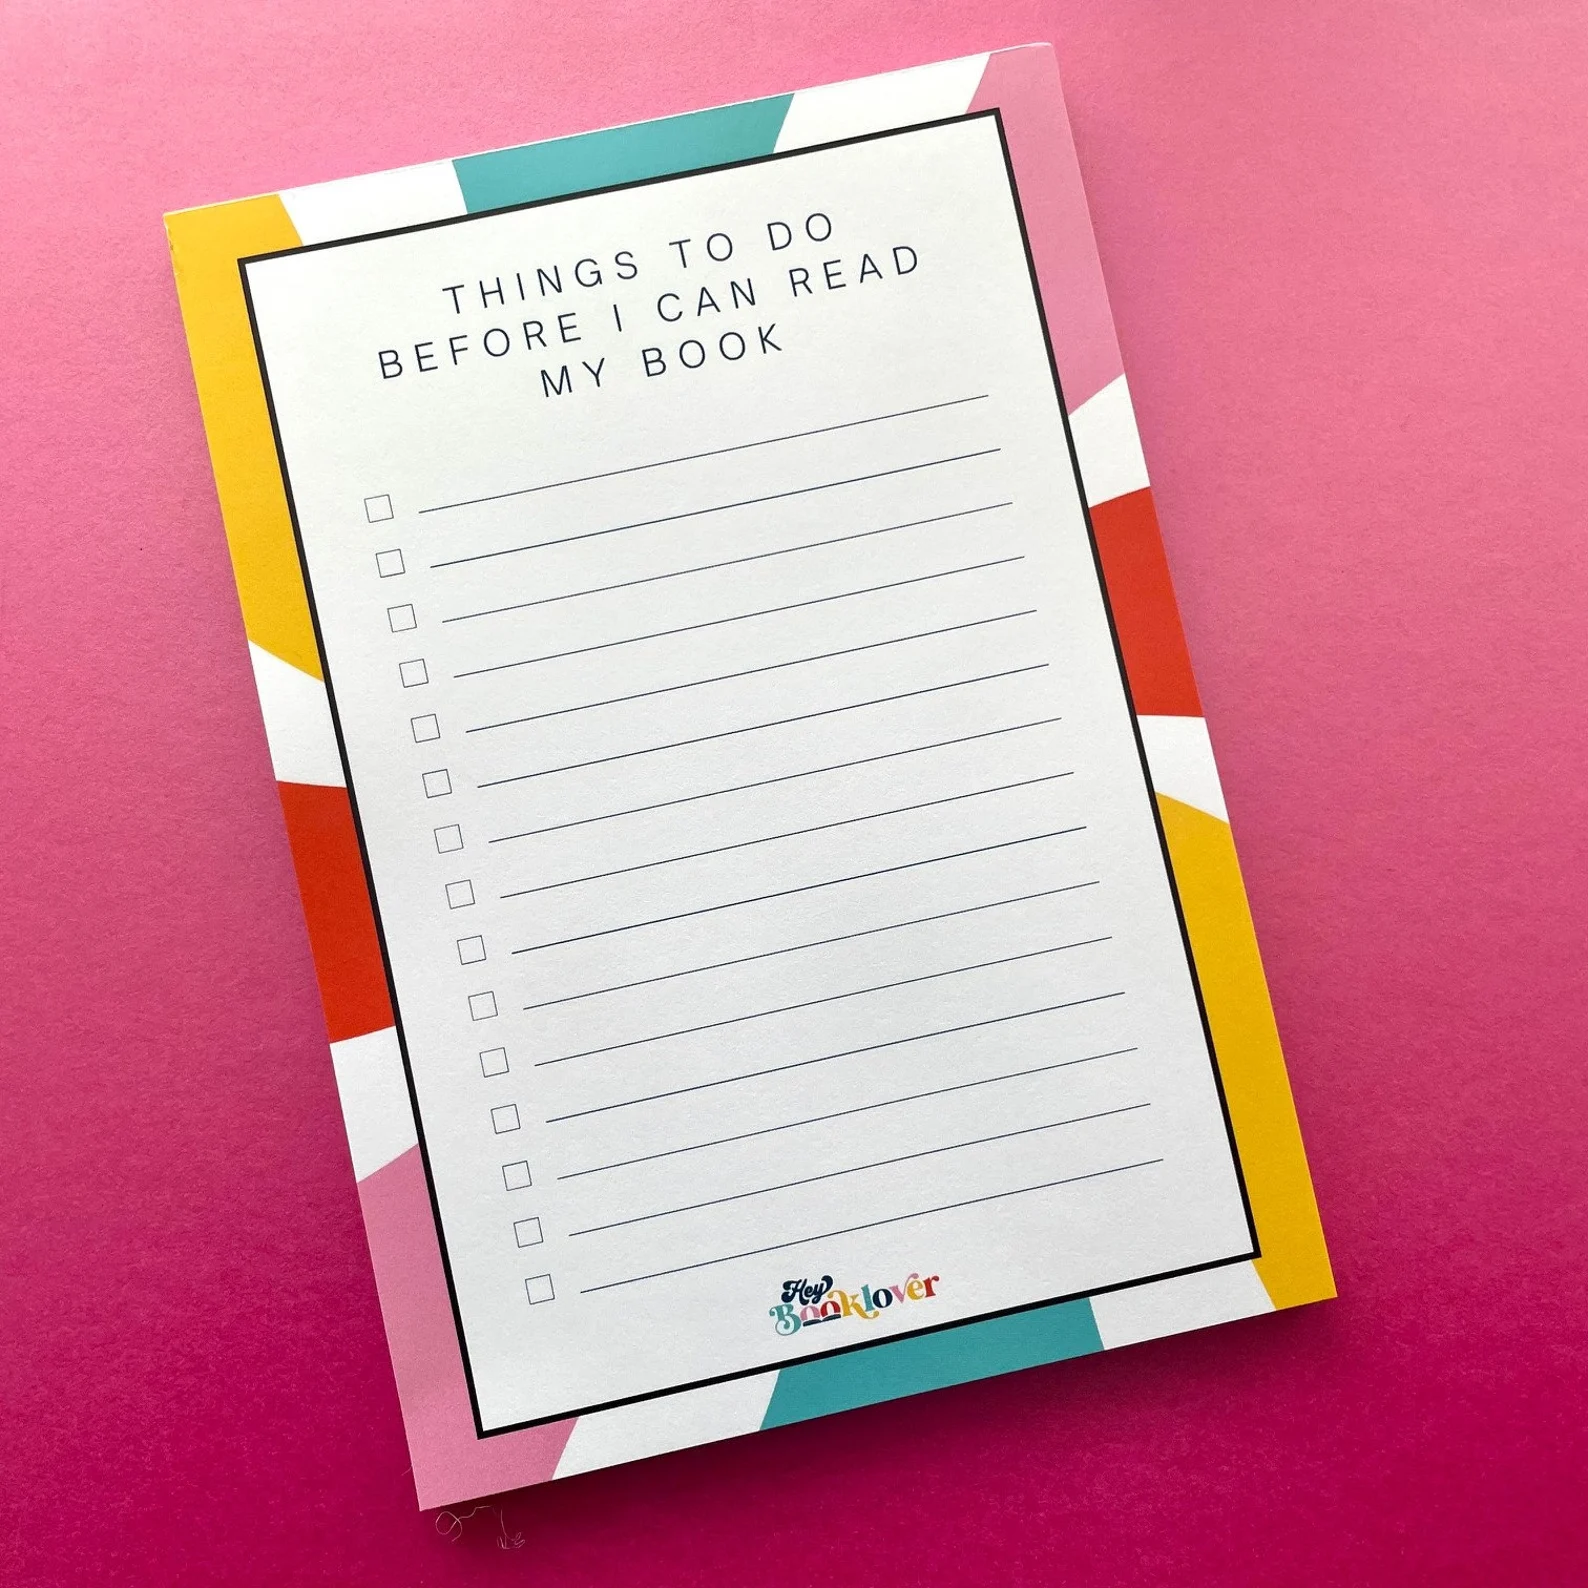 notepad in bright colors that says "things to do before I can read my book"